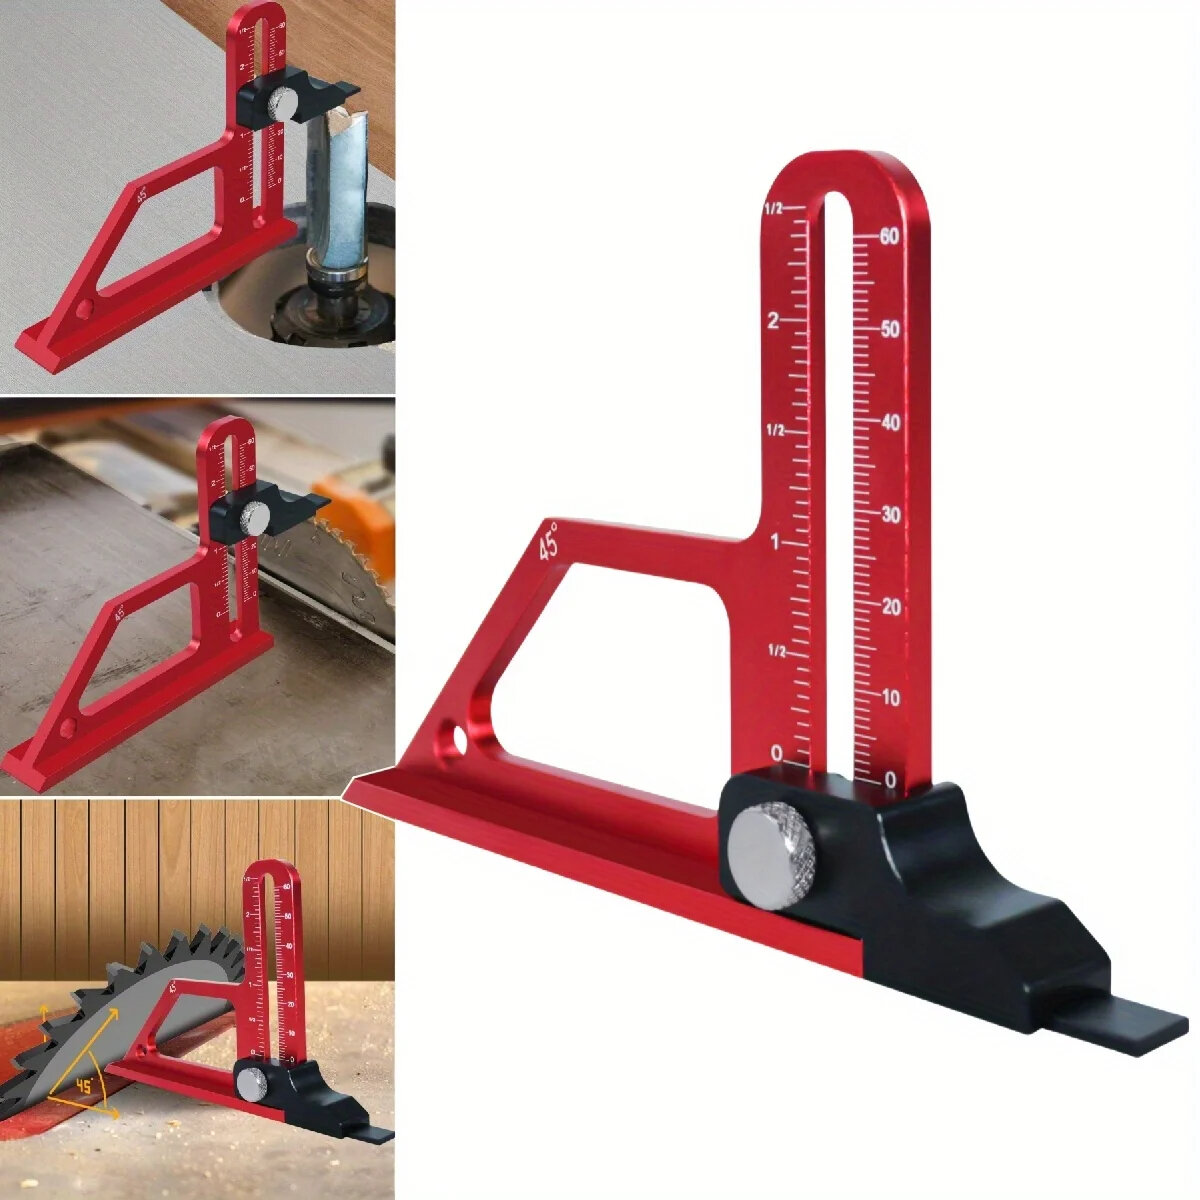 

Adjustable Table Saw Depth Gauge 0-60mm with Metric and Inch Scale Aluminum Installing Blade Router Bits Height Measurin